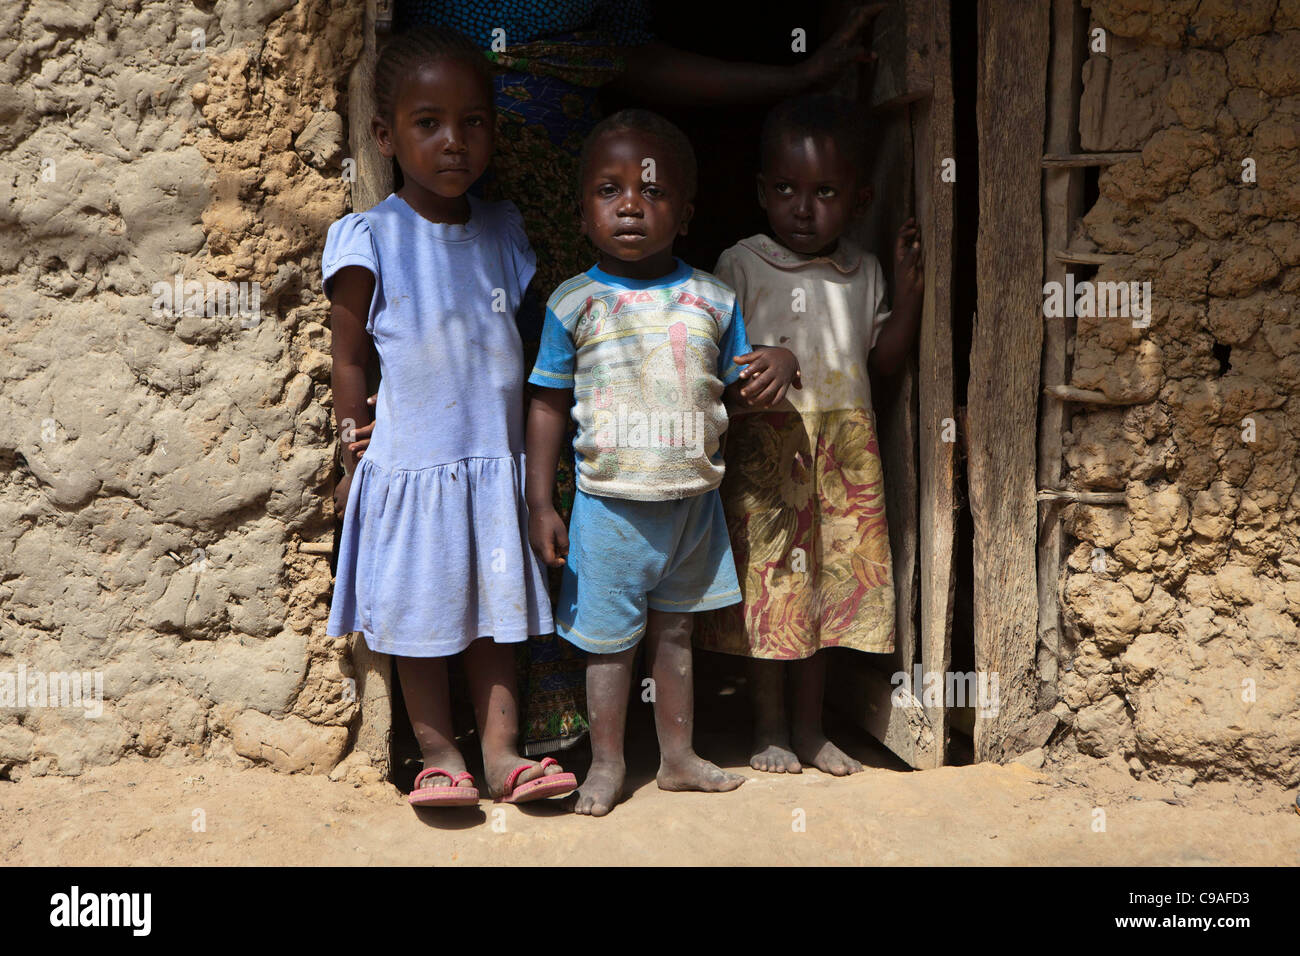 Family outside their home near Mombasa, Kenya. The children are supported by Wema an NGO supporting street children. Stock Photo